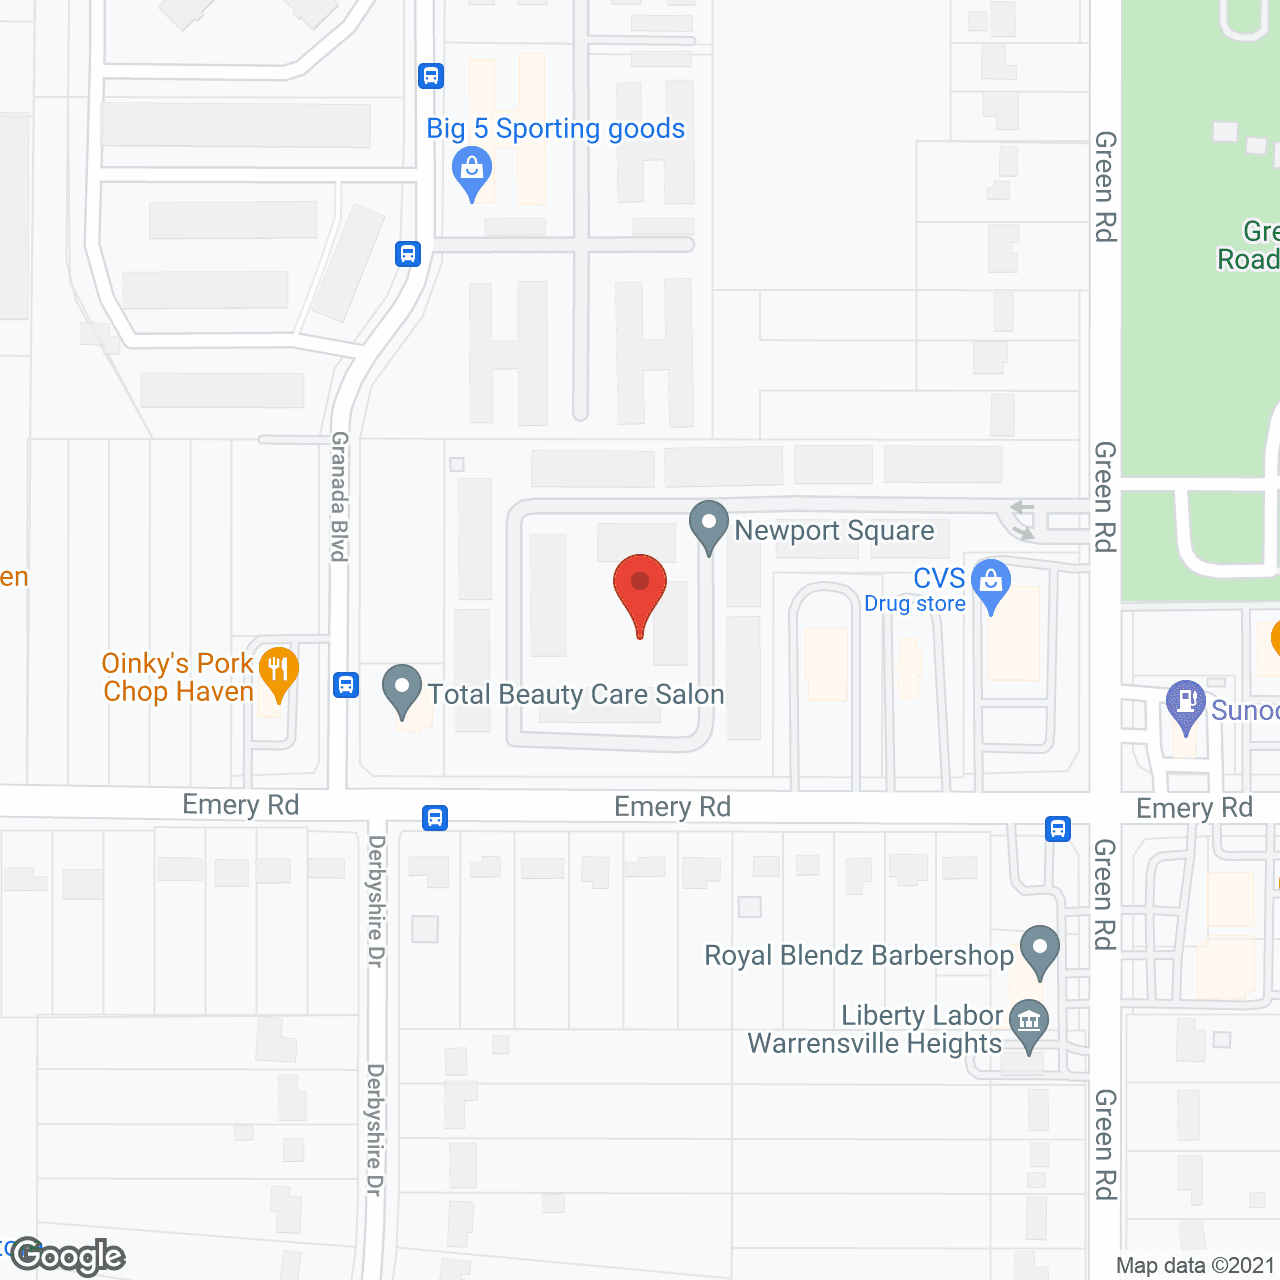 Newport Square Apartments in google map